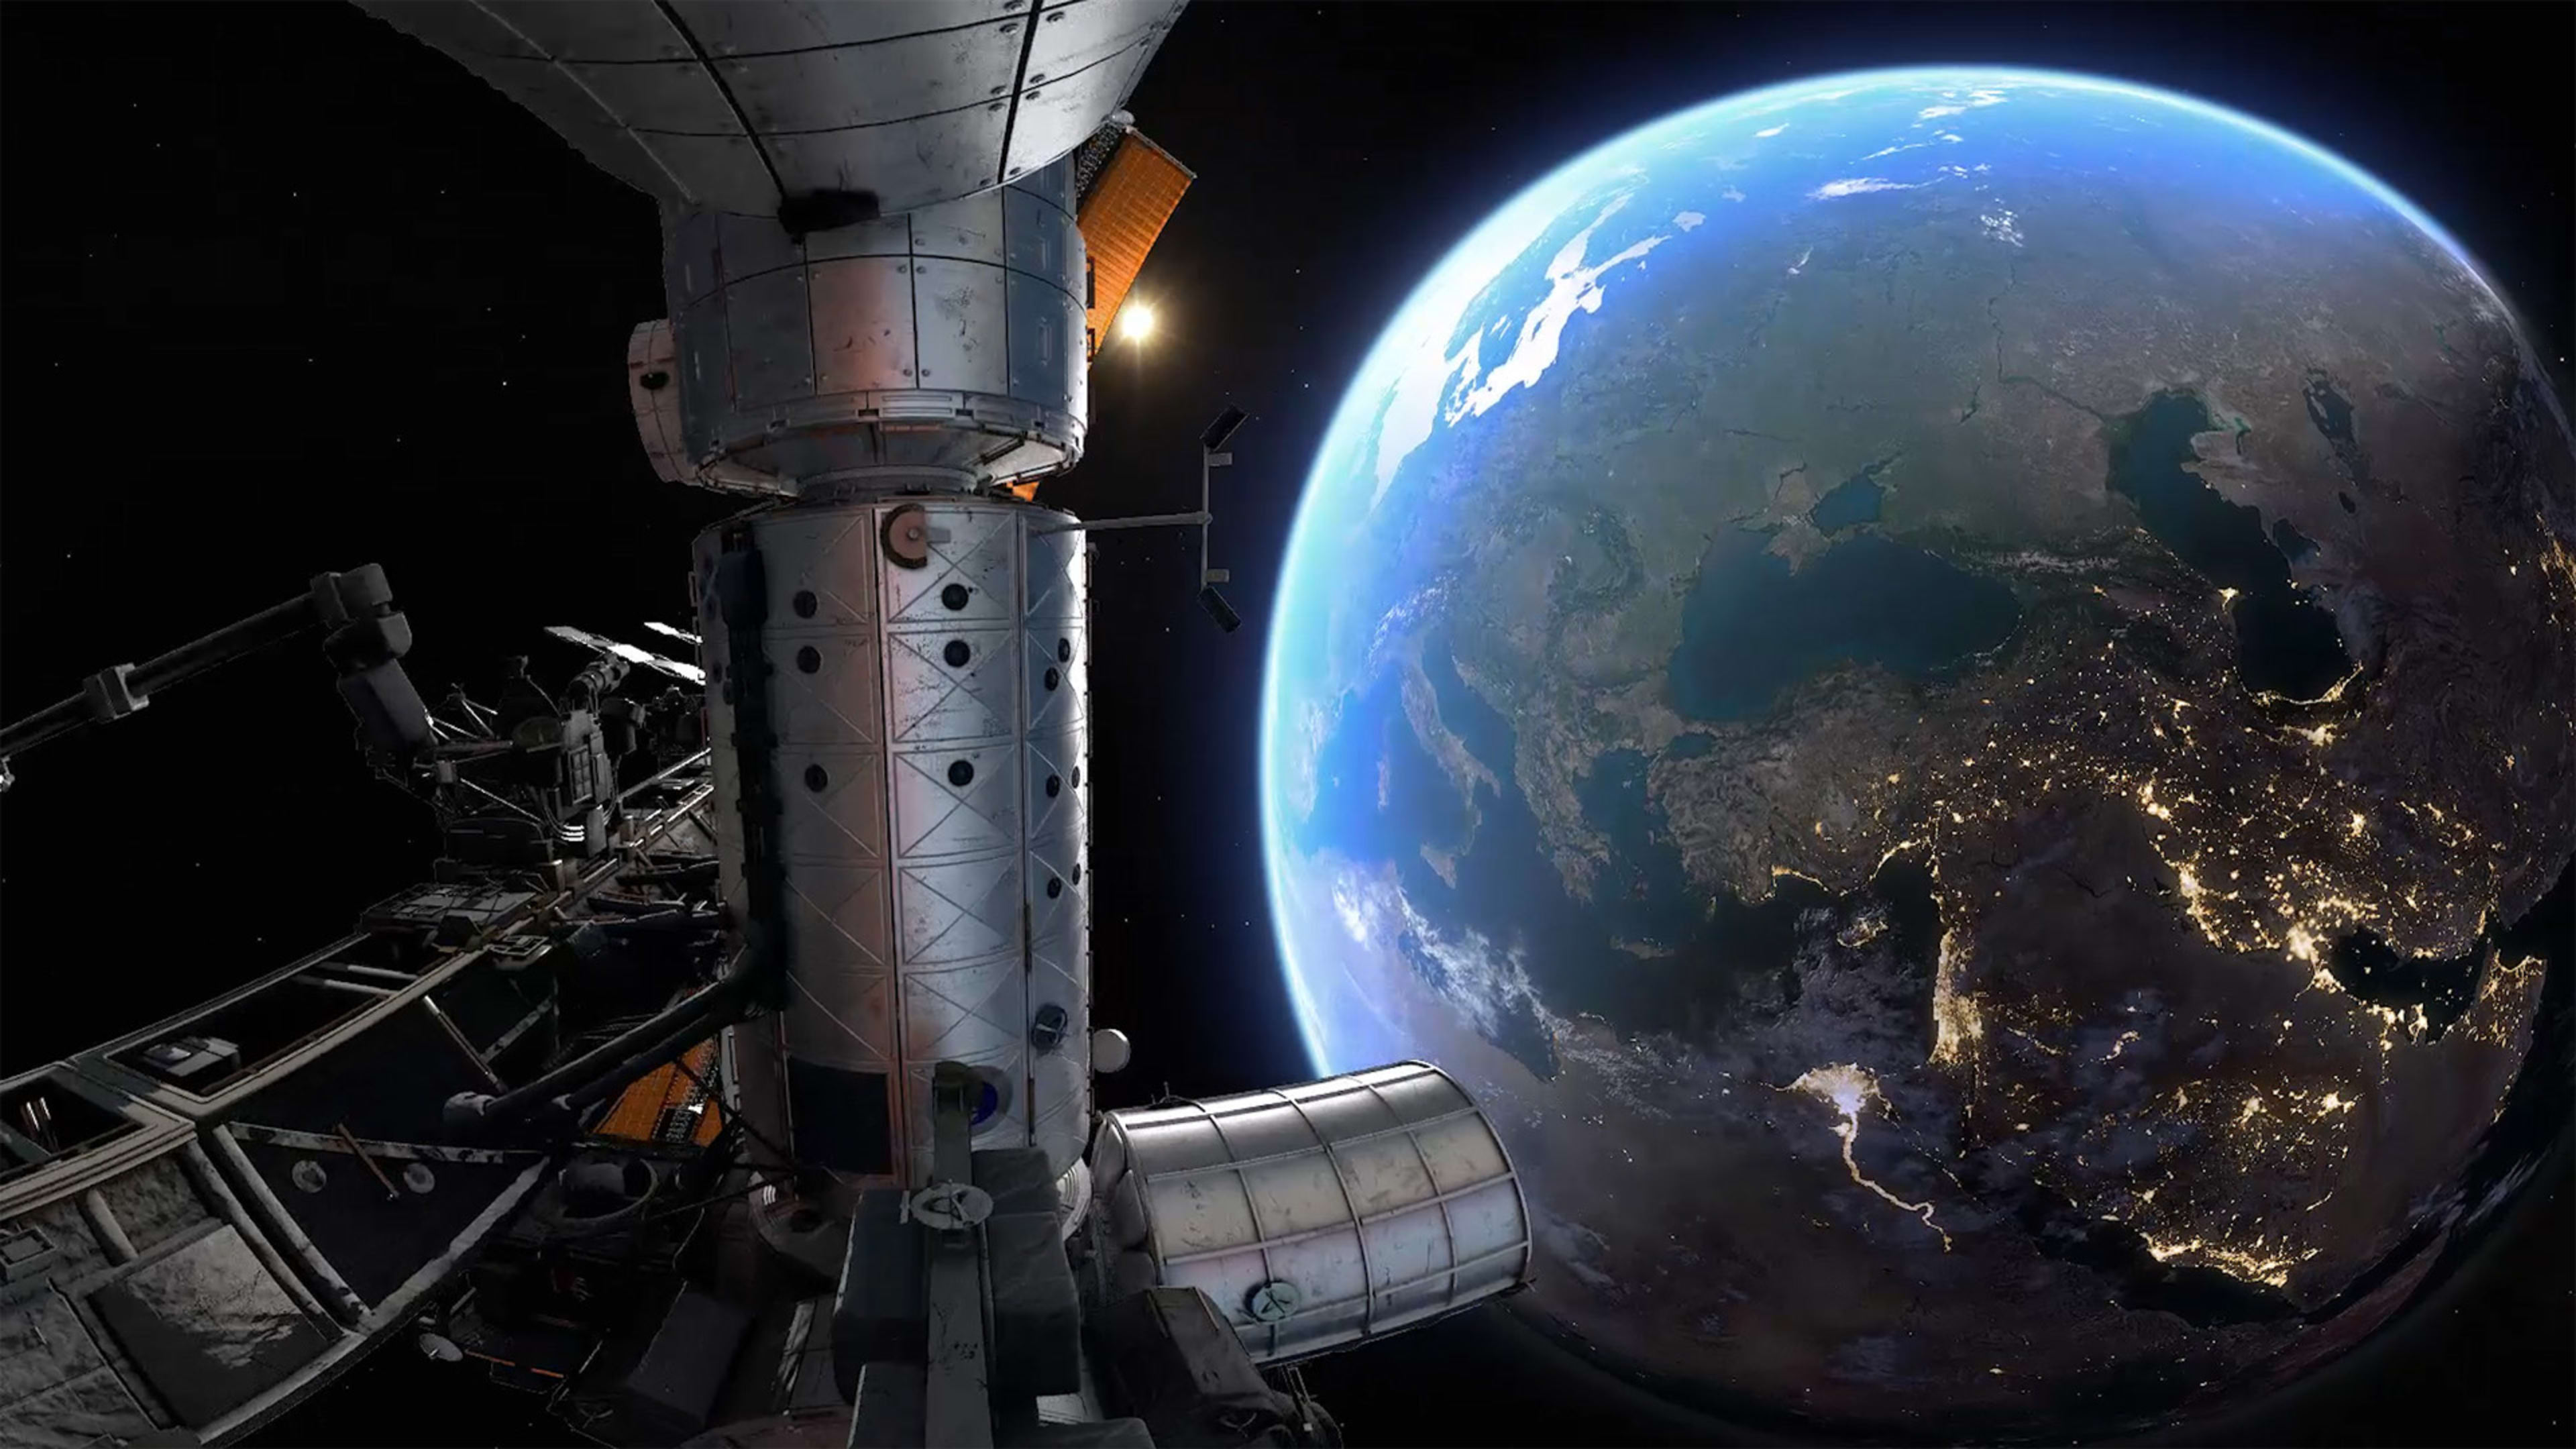 Let this guided VR trip show you the Earth from space—and change your mind about the planet